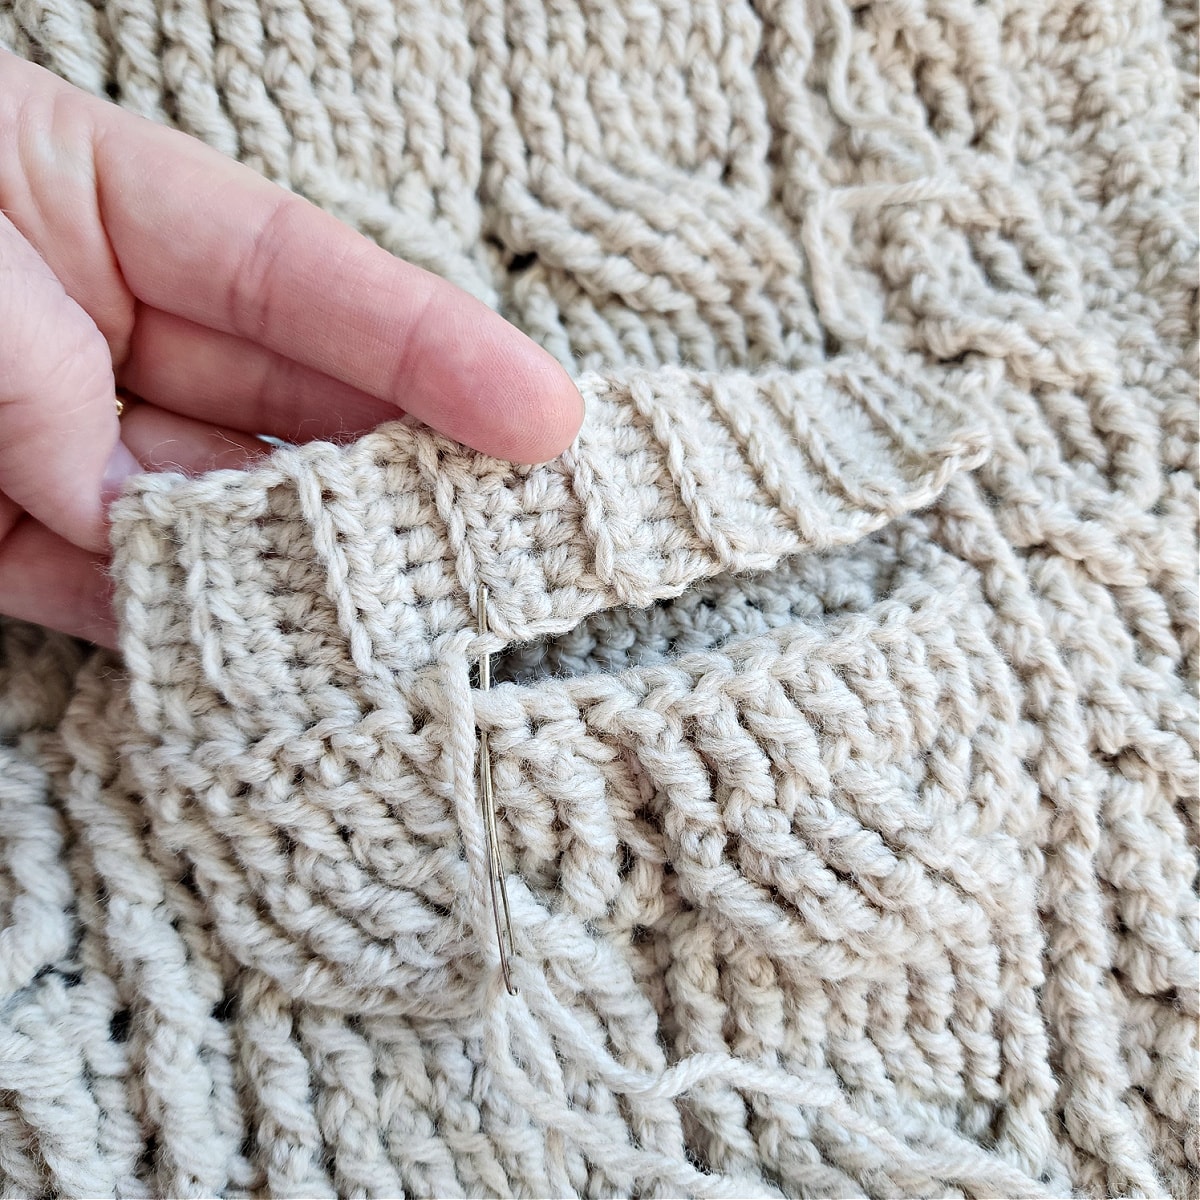 Crochet ribbing being sewn onto pocket opening with yarn needle and tail of yarn.